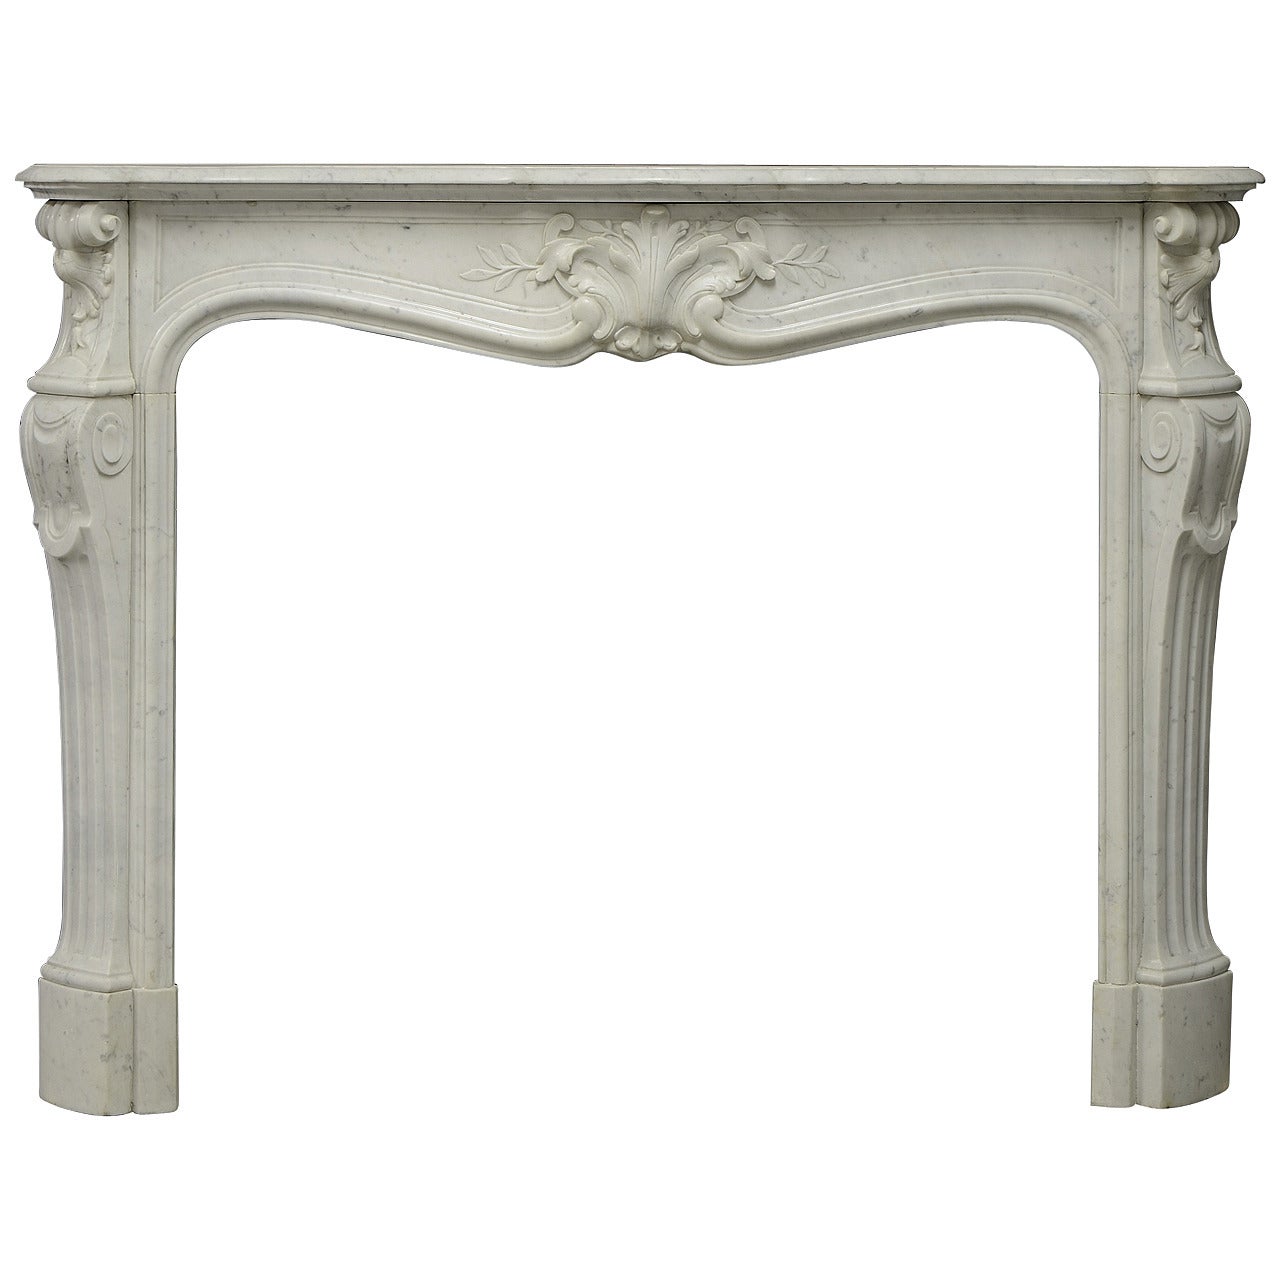  Antique Fireplace Mantel in White Marble Very Elegant French Louis XV  